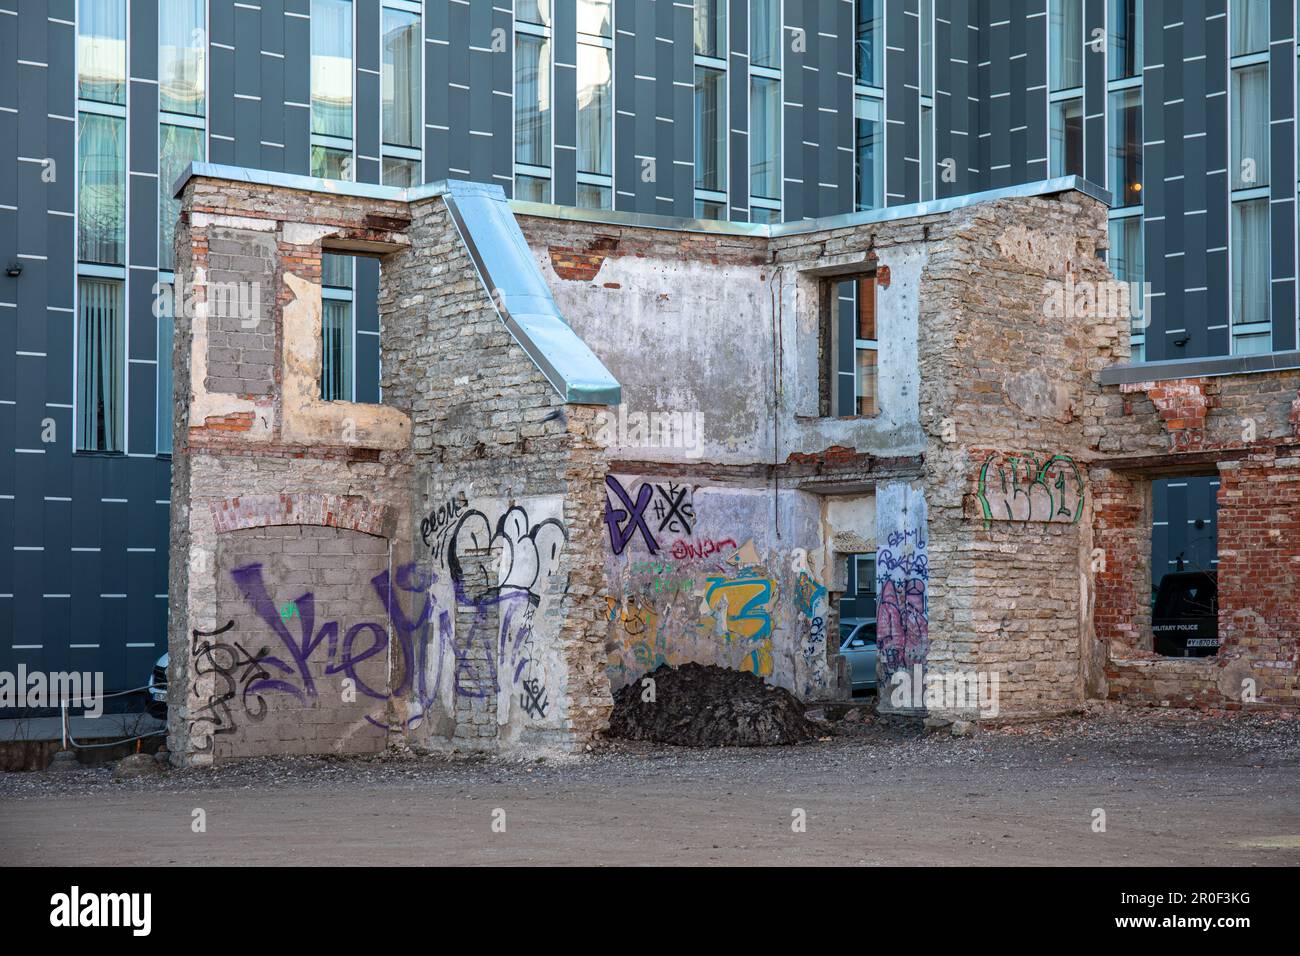 Ruins of an old industrial building against a backdrop of modern commercial building in Rotermanni Quarter of Tallinn, Estonia Stock Photo